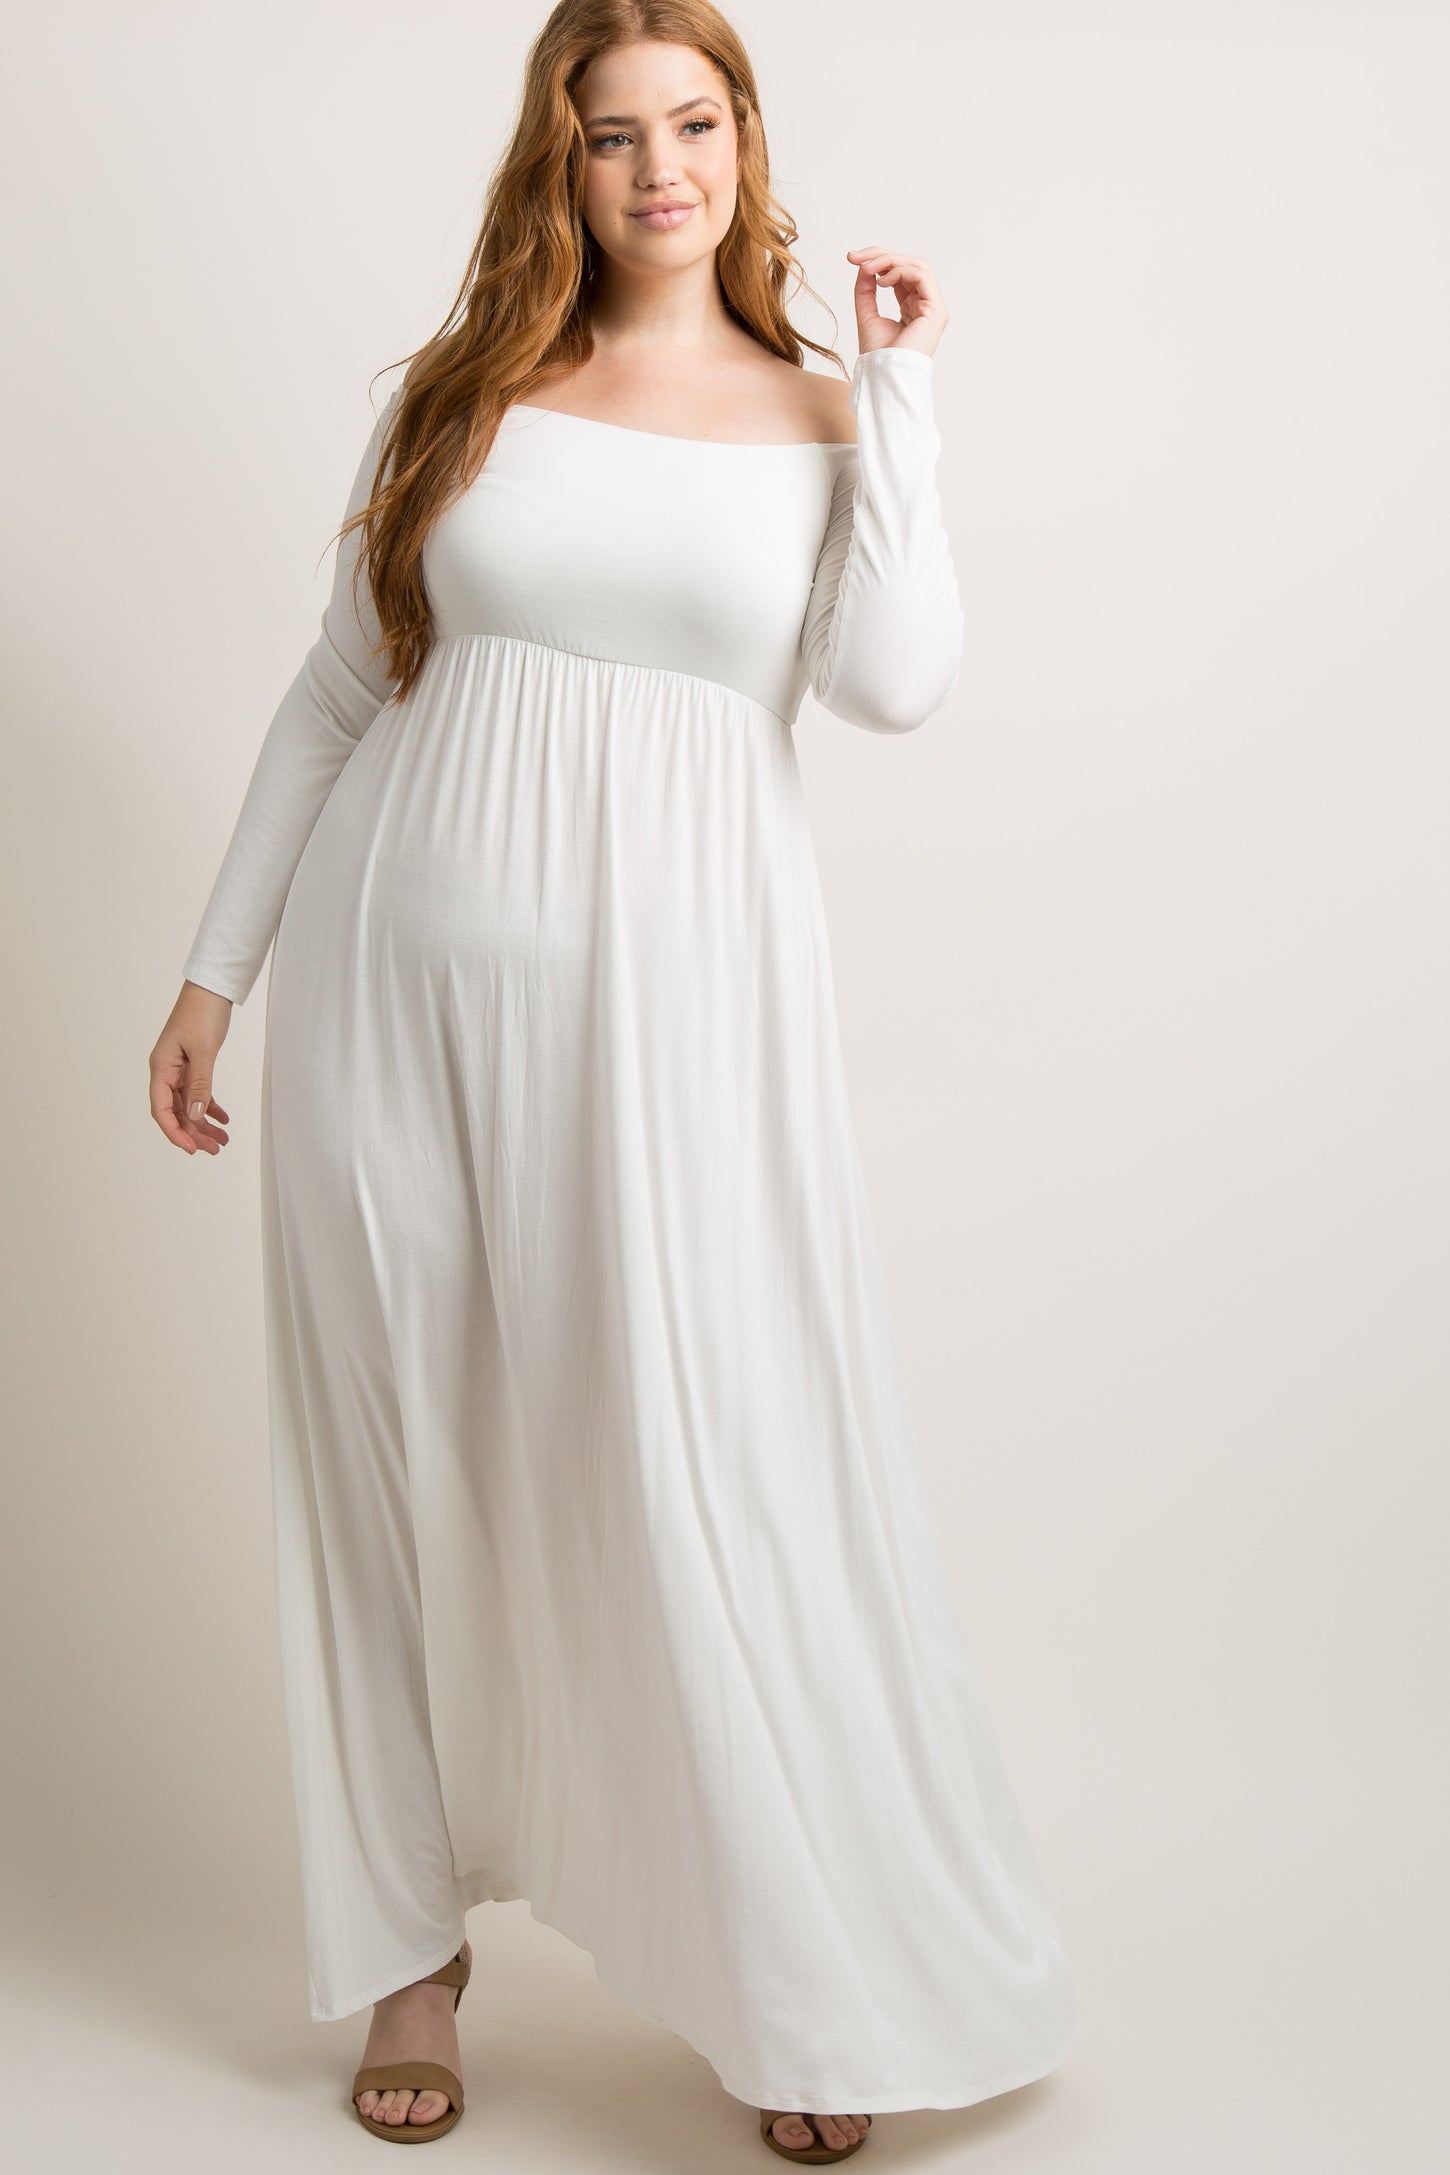 PinkBlush Ivory Solid Off Shoulder Plus Maternity Maxi Dress